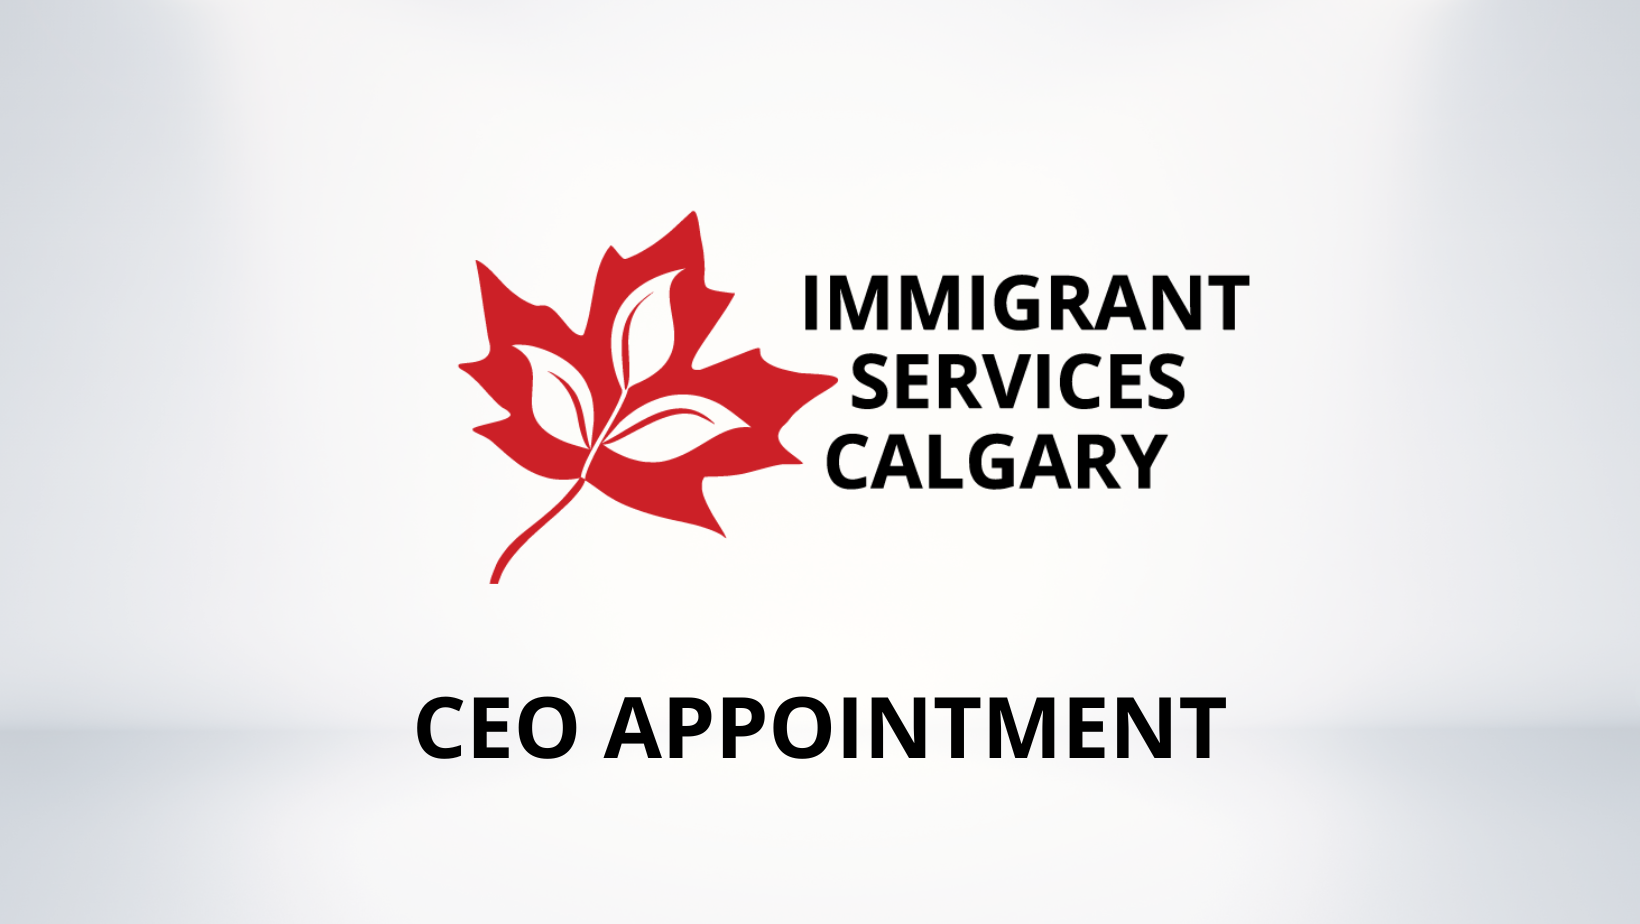 Immigrant Services Calgary Board of Directors Appoints Nawal Al-Busaidi as new Chief Executive Officer